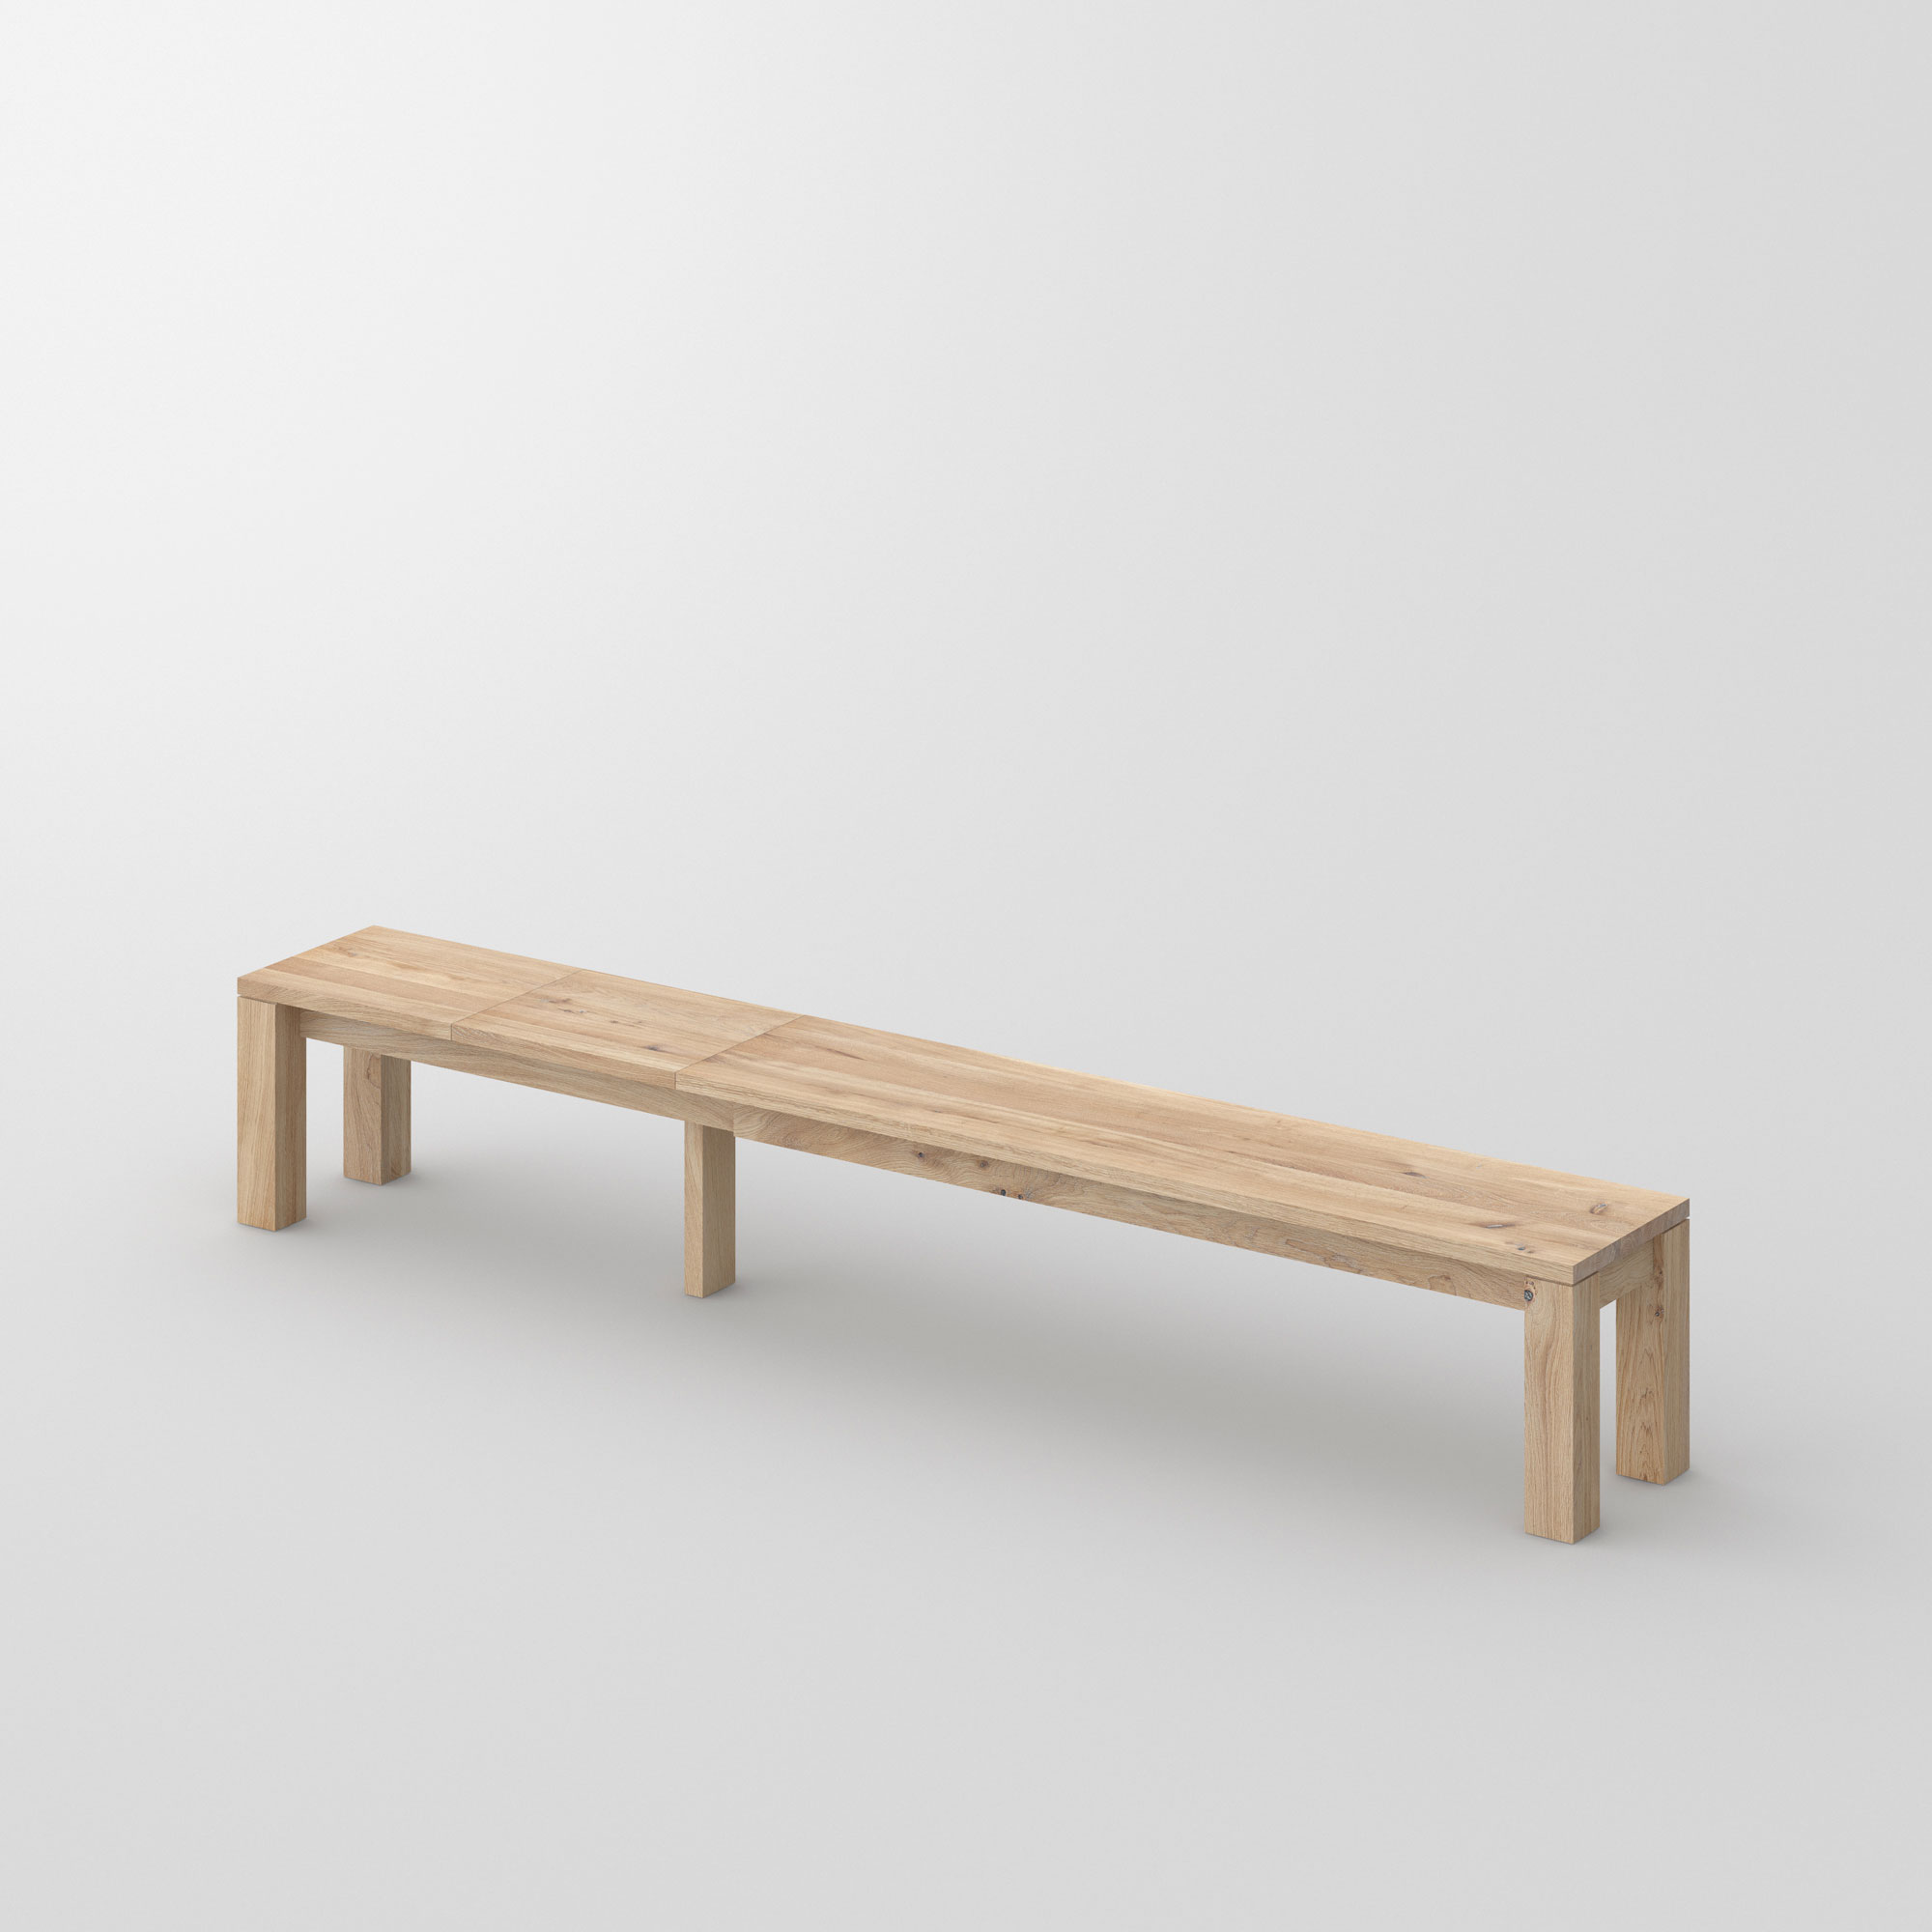 Pull-out Wood Bench LIVING EP cam1 custom made in solid wood by vitamin design